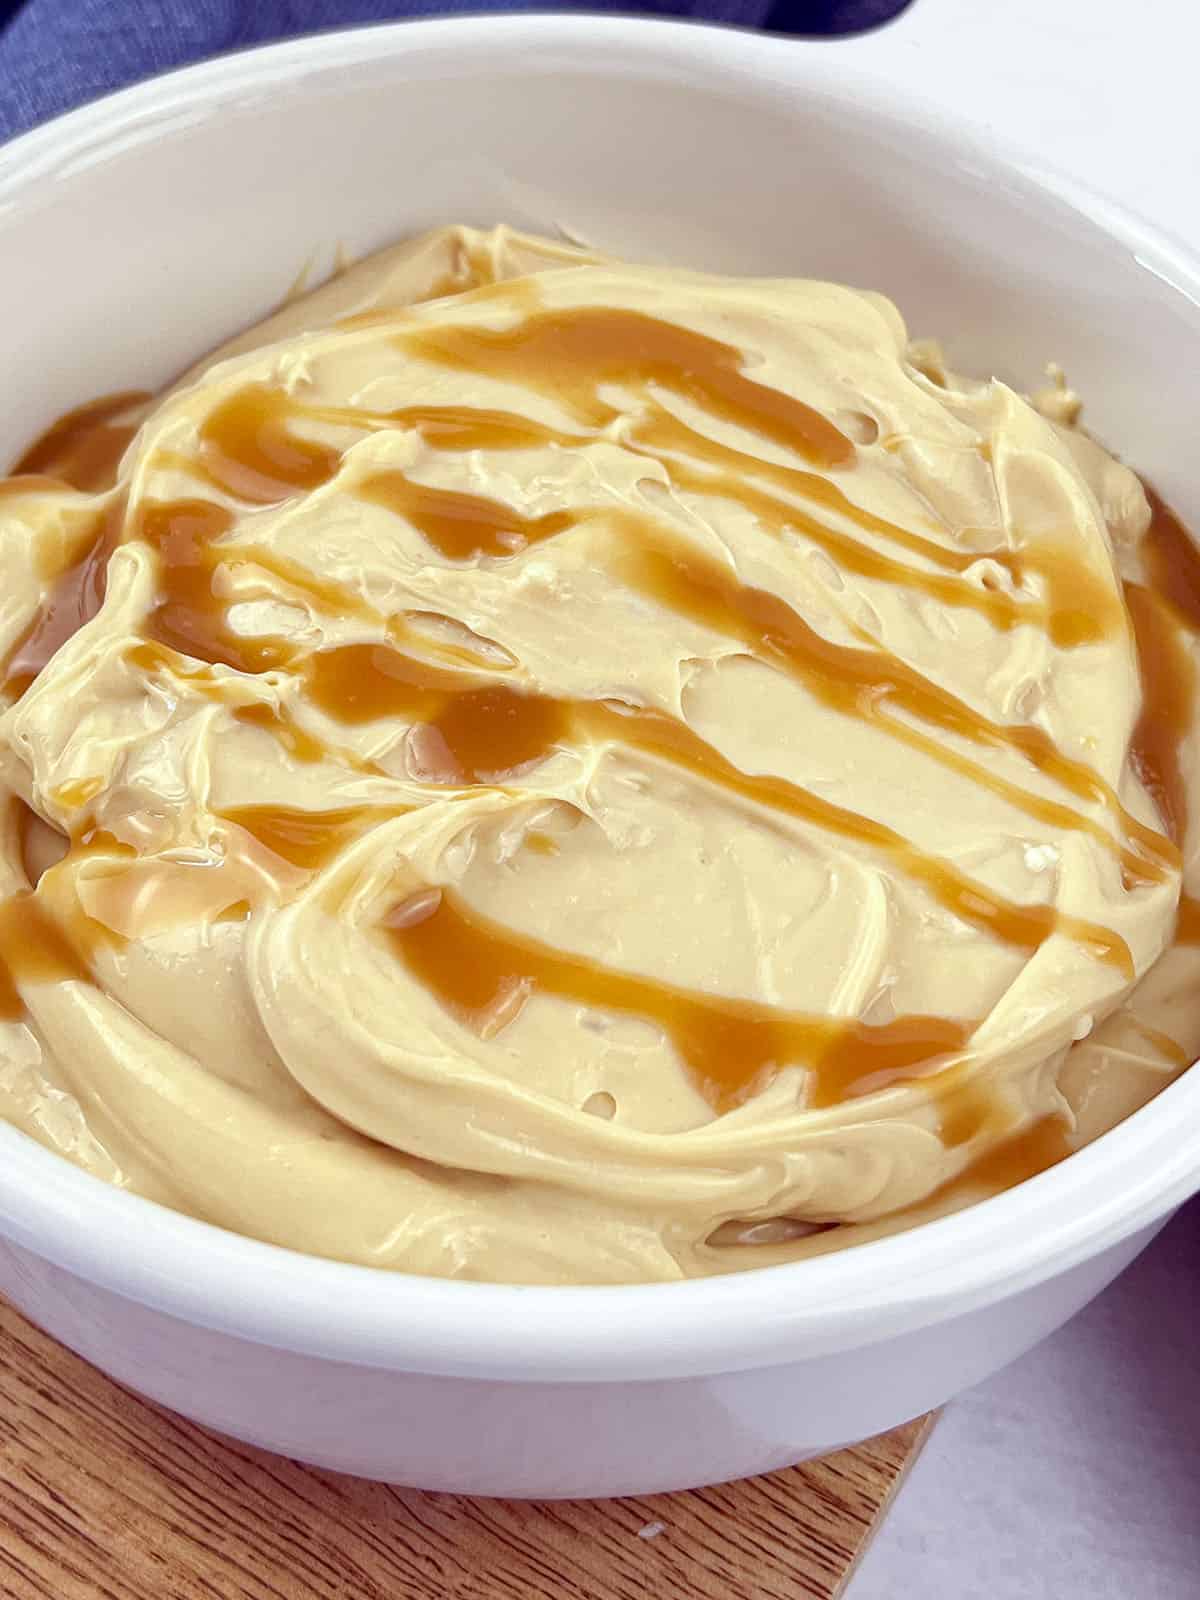 A close up image of the caramel dip in a white serving bowl.